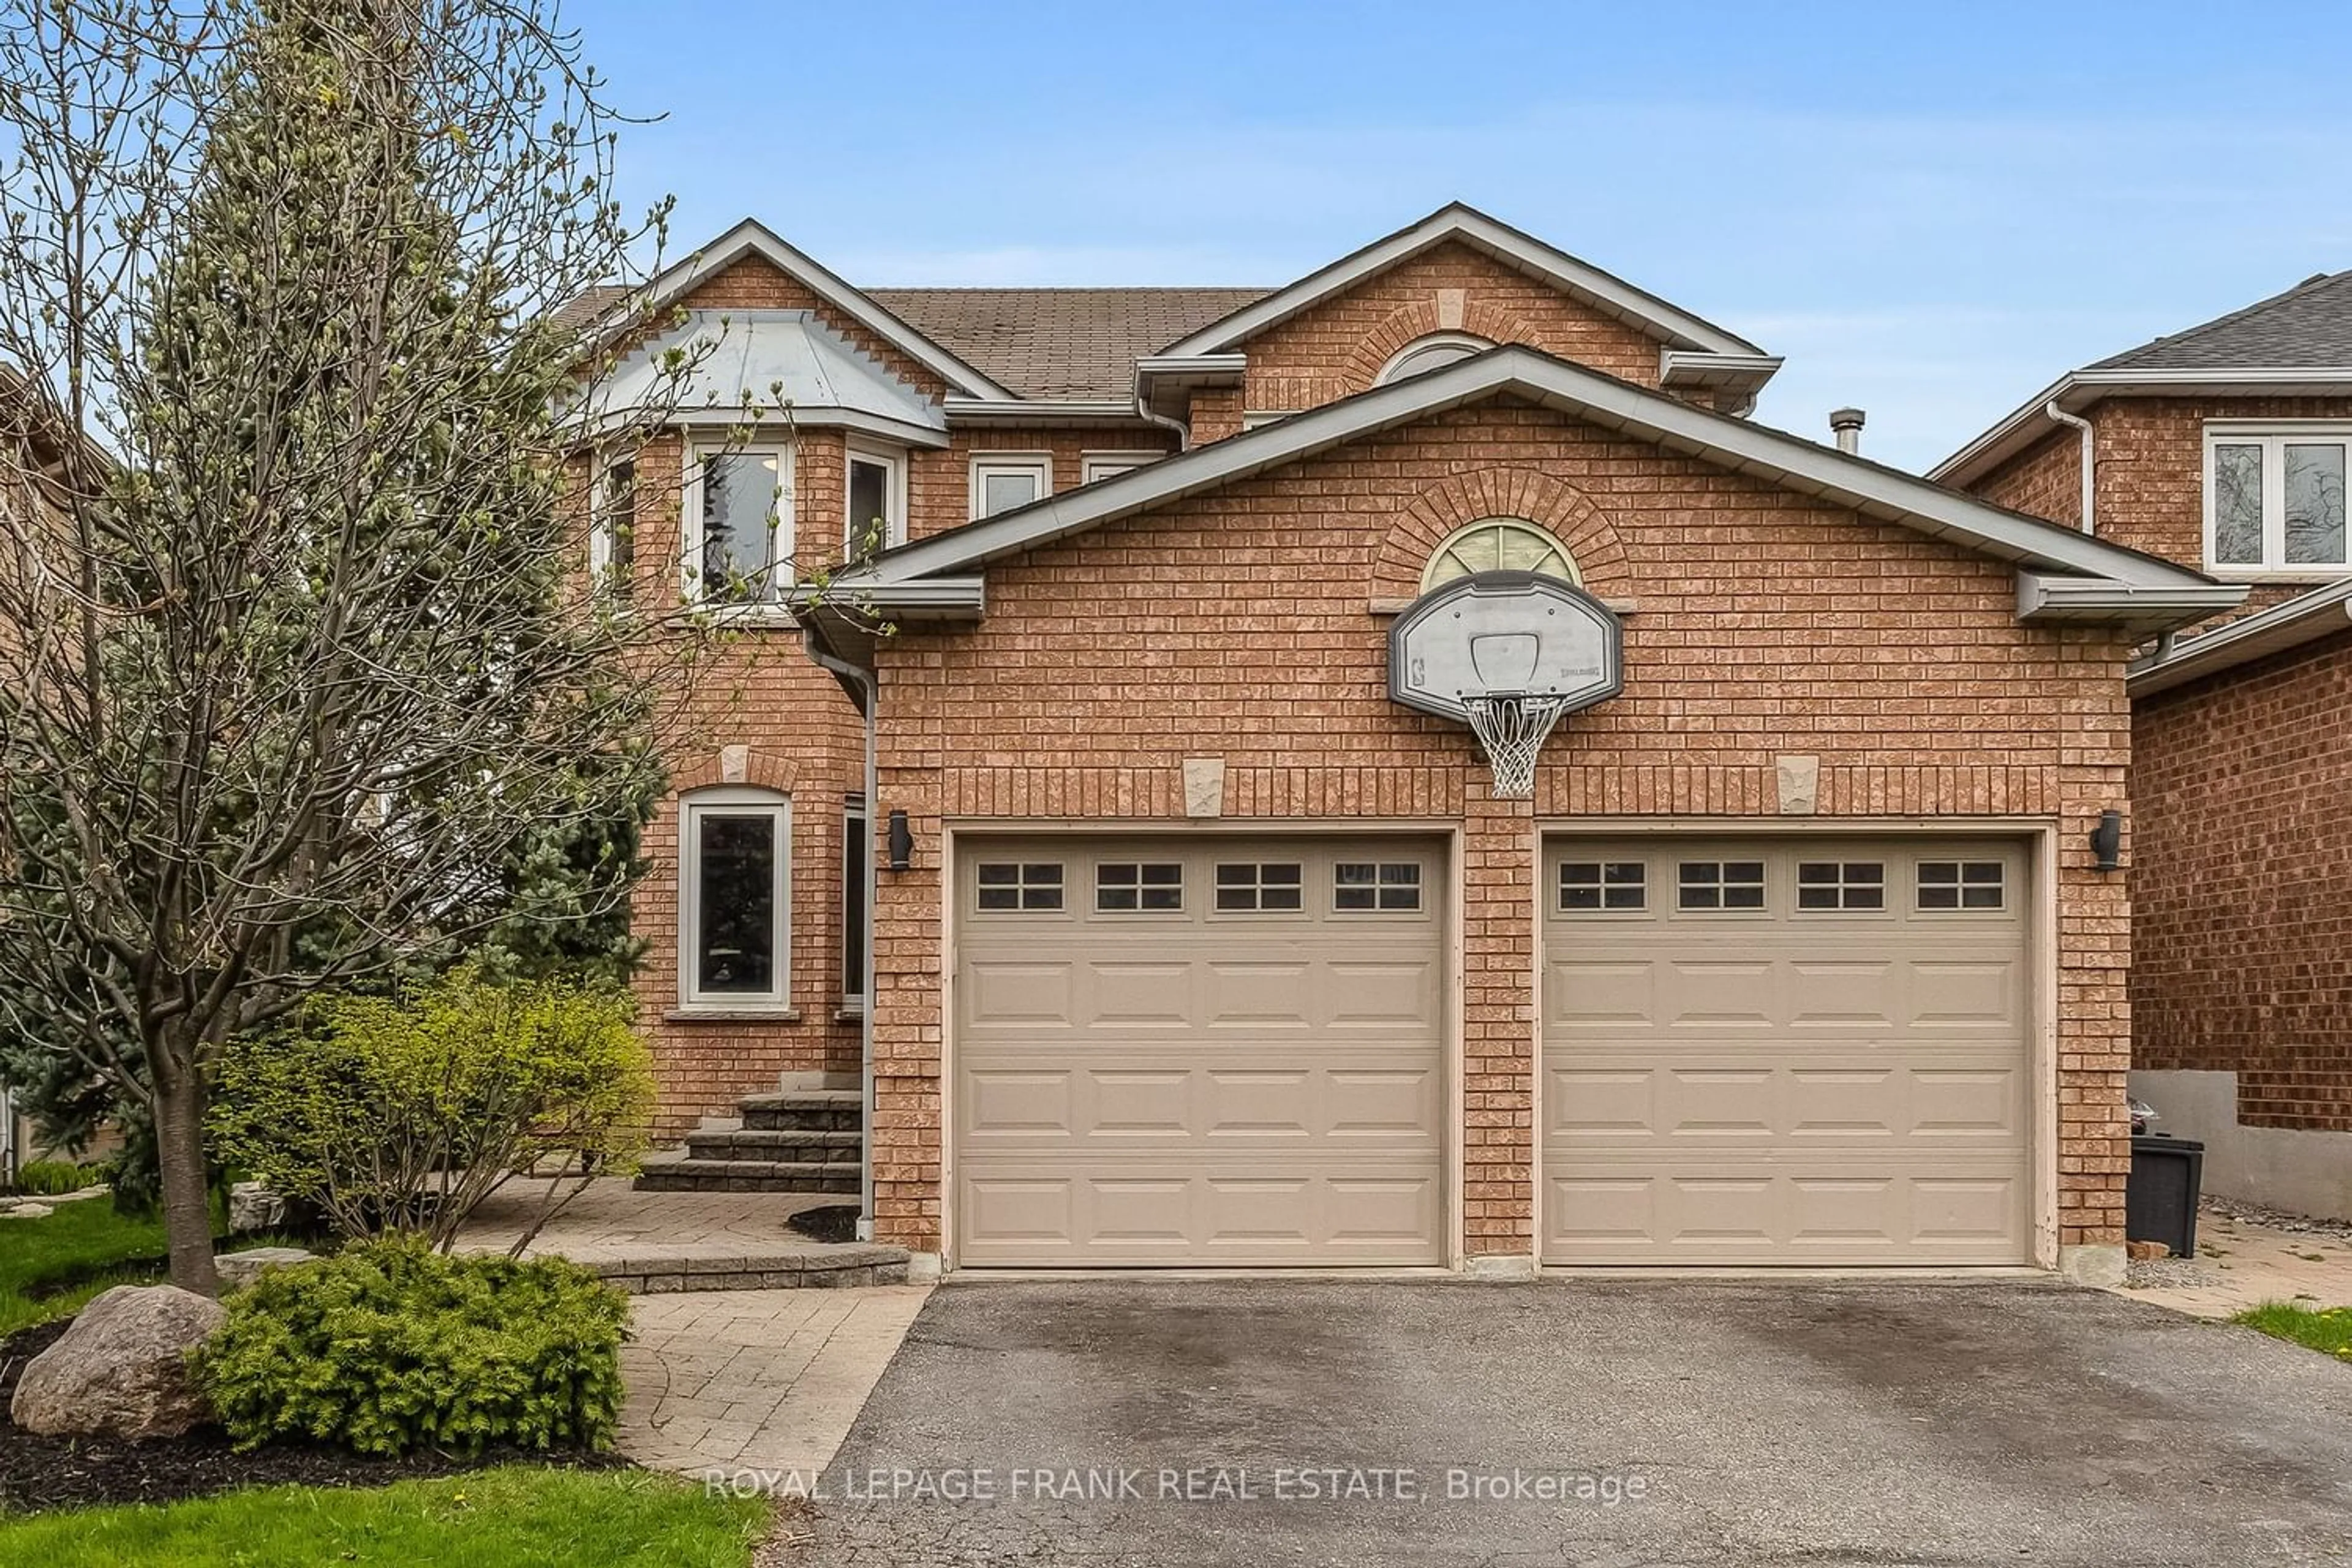 Home with brick exterior material for 54 Ringwood Dr, Whitby Ontario L1R 1Y7